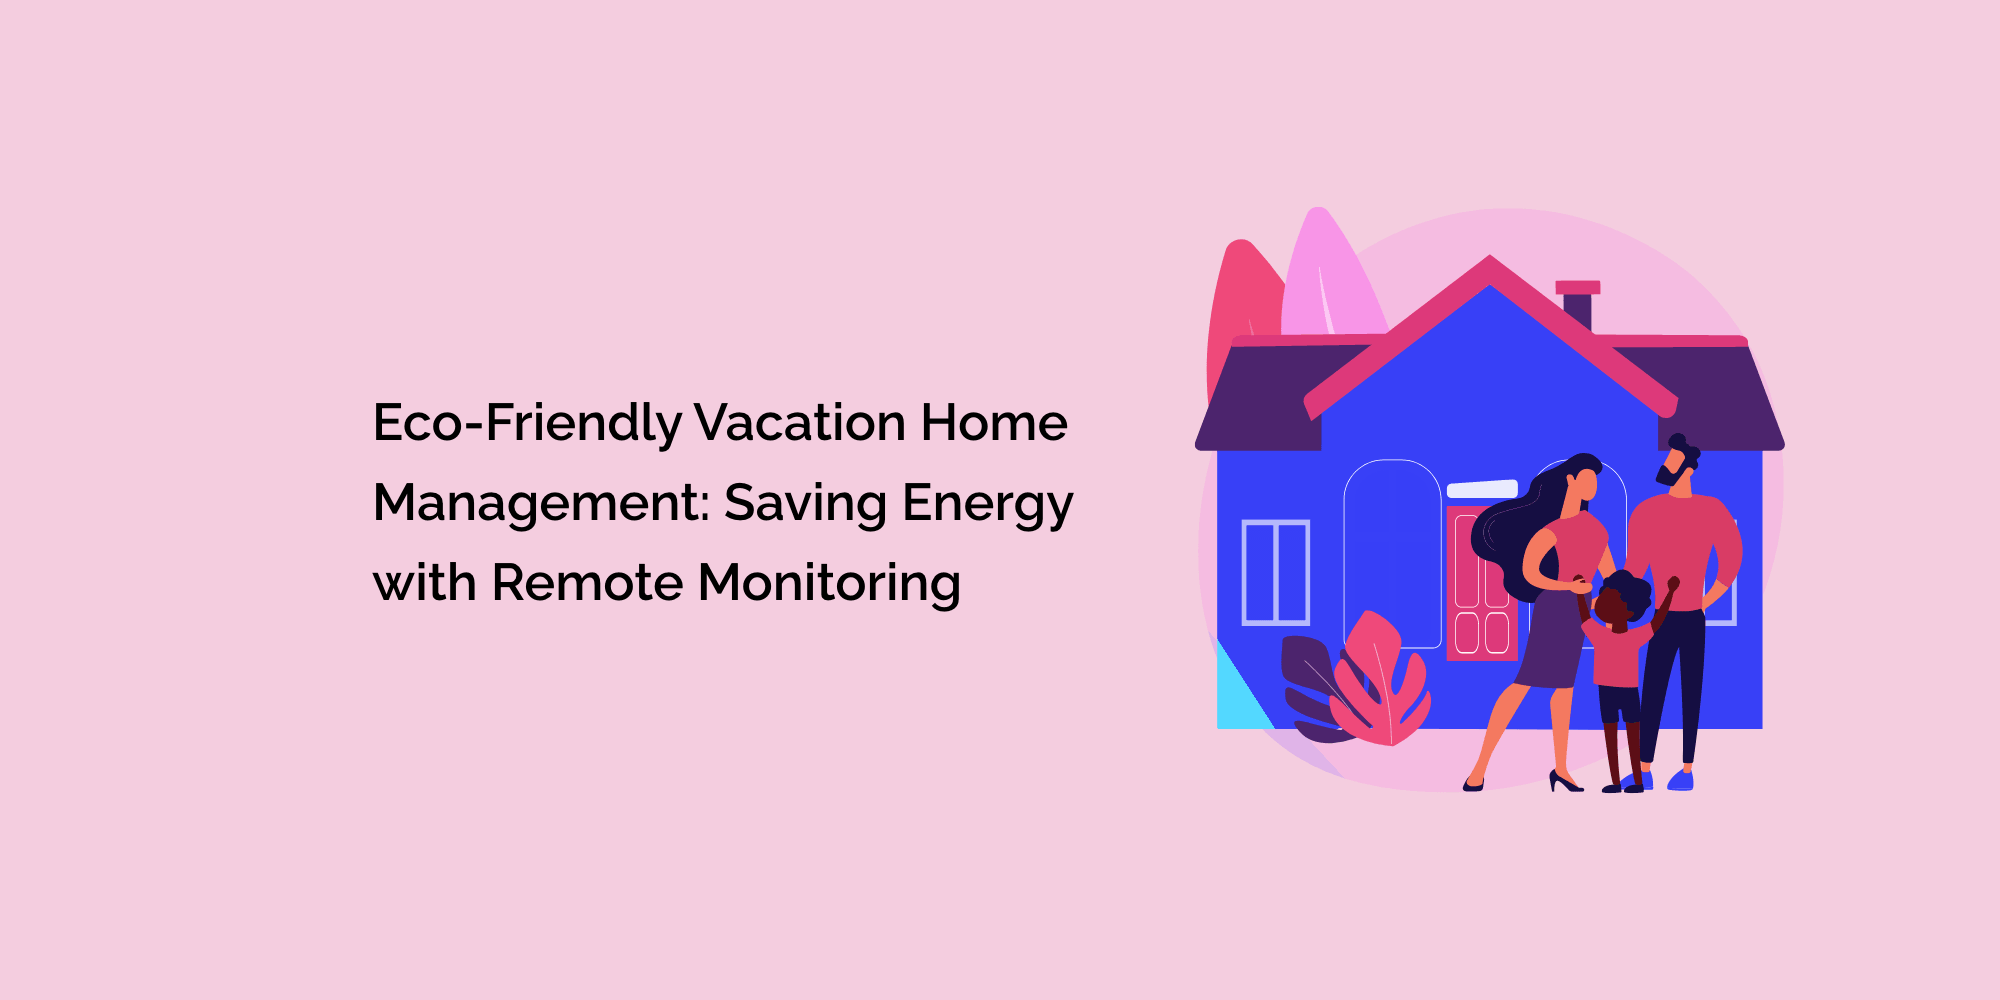 Eco-Friendly Vacation Home Management: Saving Energy with Remote Monitoring